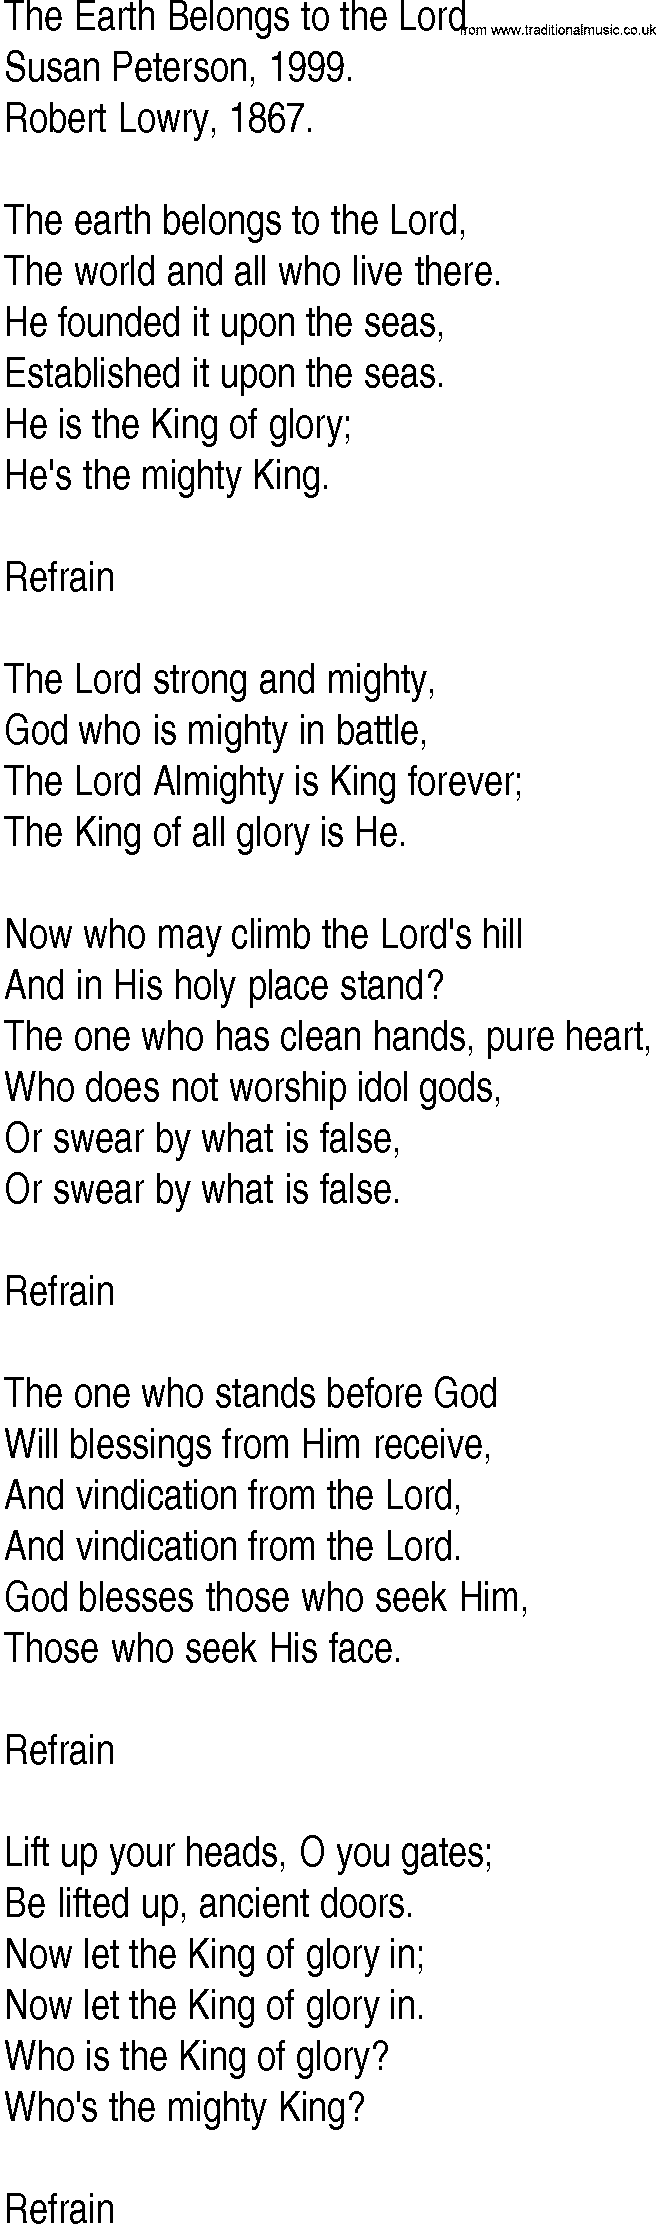 Hymn and Gospel Song: The Earth Belongs to the Lord by Susan Peterson lyrics